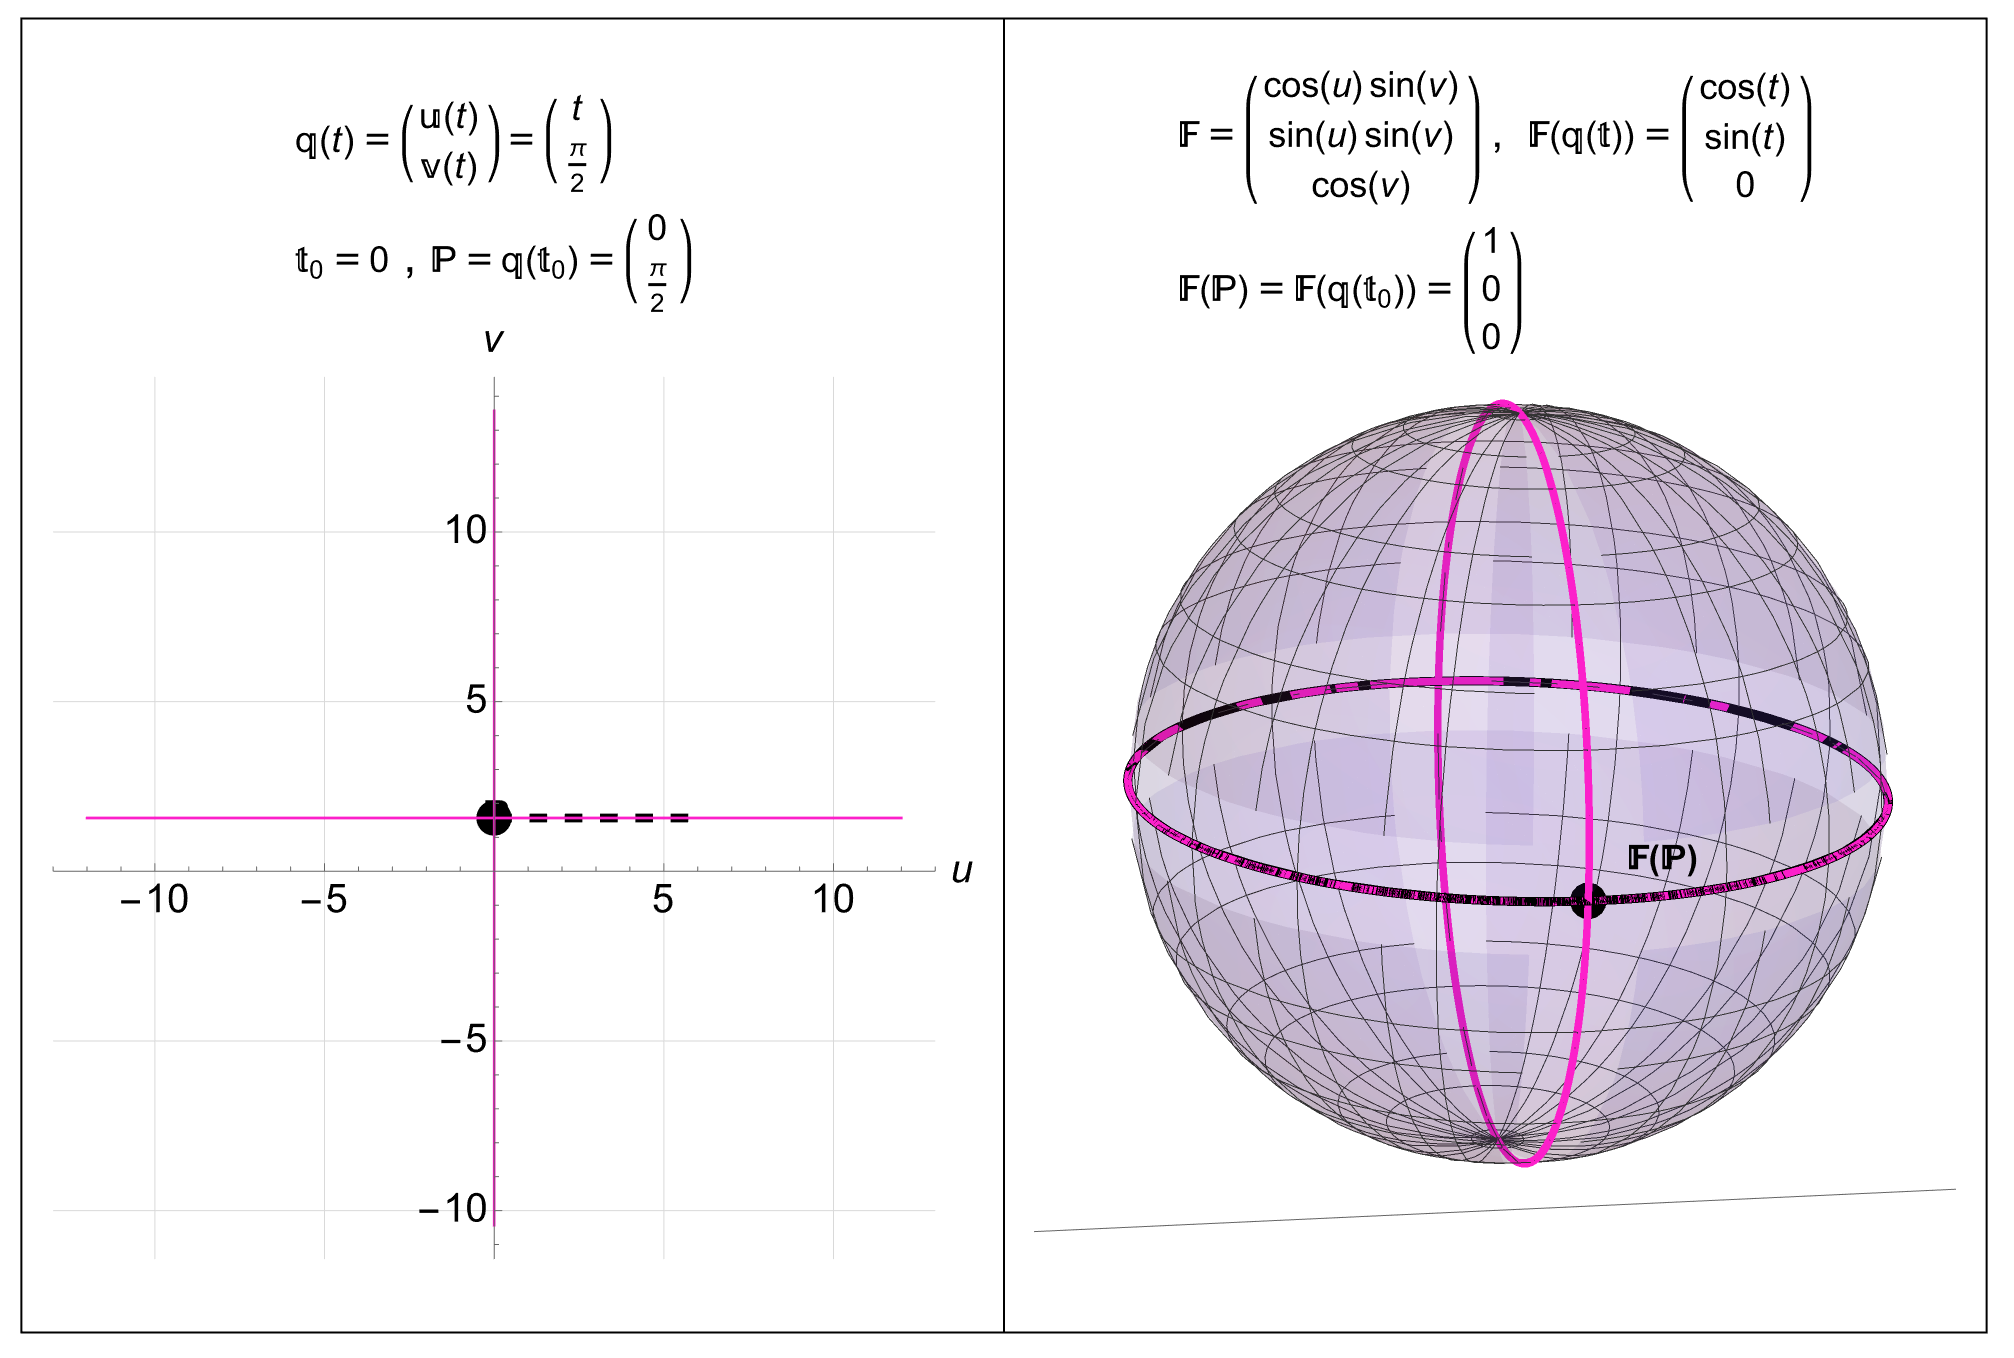 Mapping the Equator in Coordinate Space to Real 3D Space: A point \(P=(0,\pi/2)\) in 2D coordinate space maps to the point \(F^{i}(P)=(1,0,0)\) in 3D space. The black line \(q^{\alpha}(t)=(t,\pi/2)\) in coordinate space goes through the point \(P\) at time \(t=0\) and maps to the black curve in 3D space \(F^{i}(q^{\alpha}(t))=(\cos(t),\sin(t),0)\) (the Equator). We are also seeing the two pink coordinate lines through \(P\) mapped onto the surface as the two pink curves.